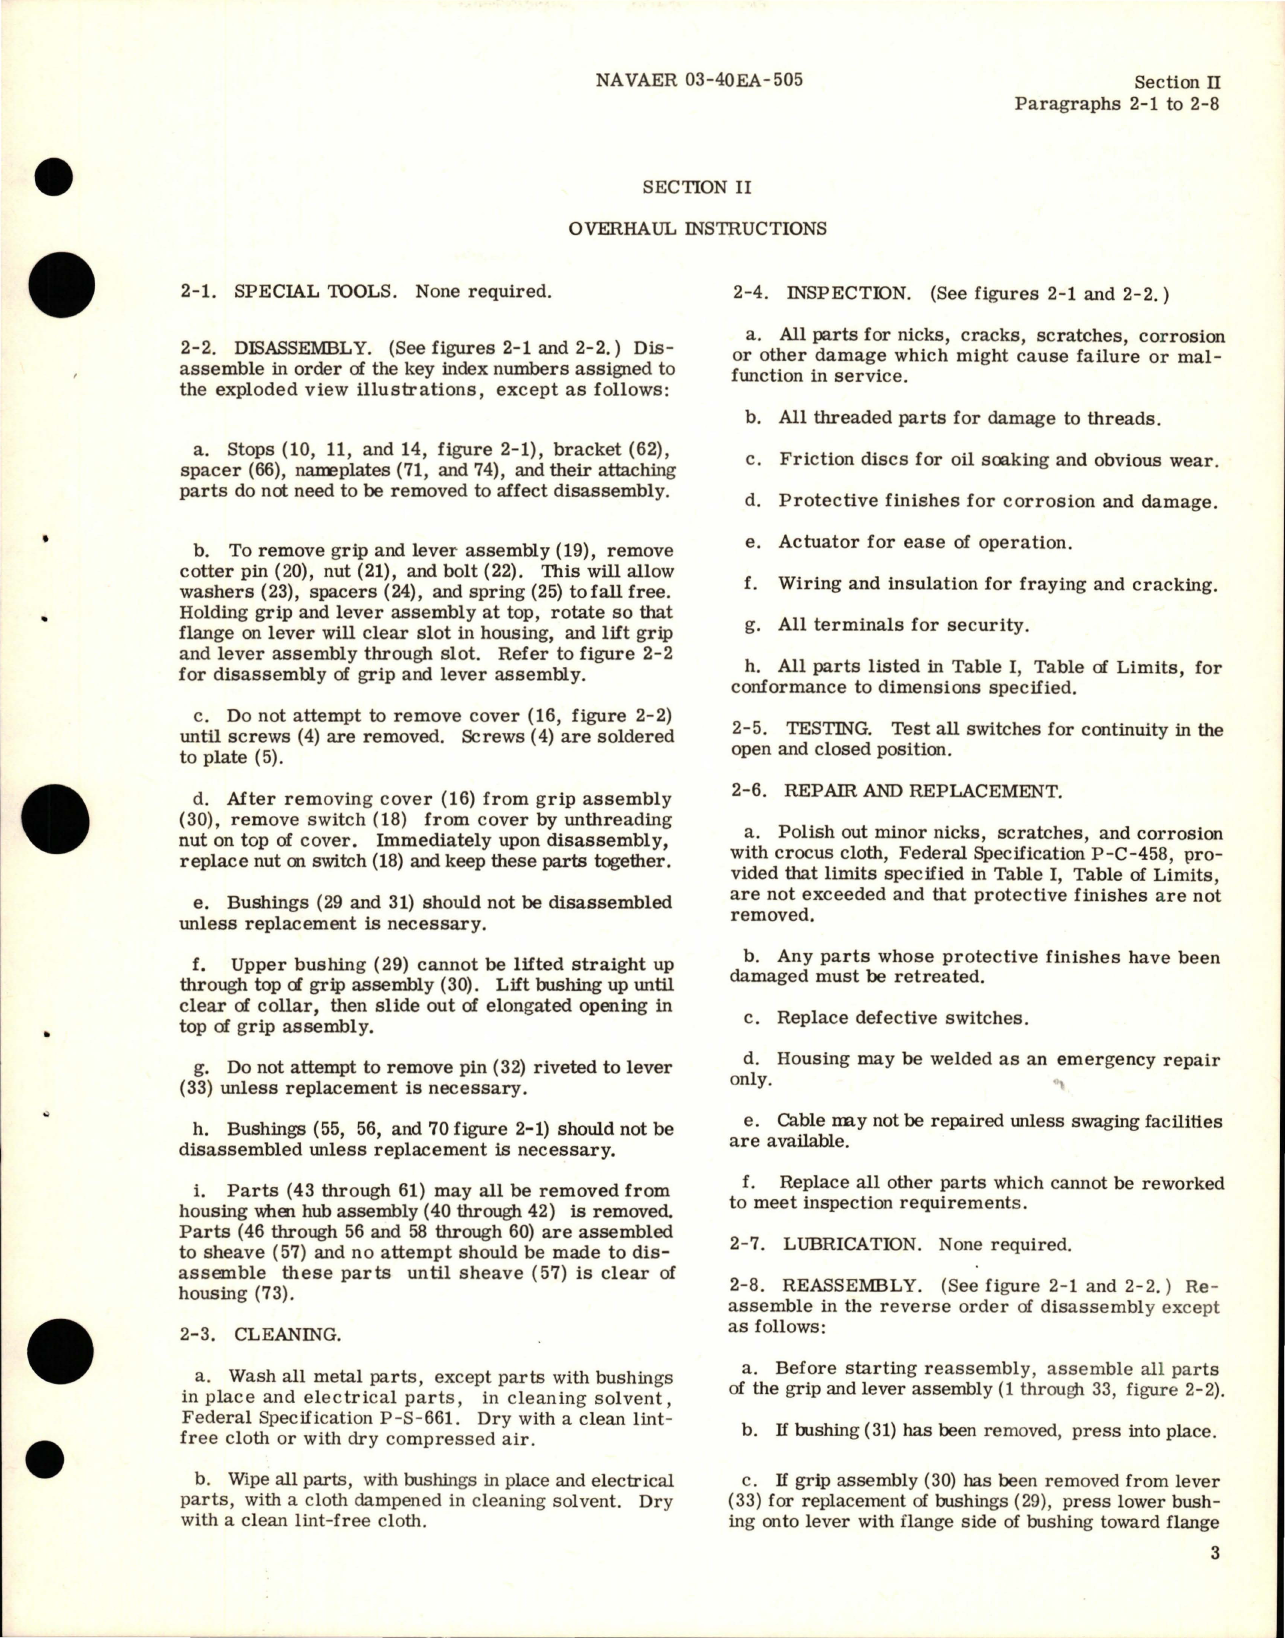 Sample page 5 from AirCorps Library document: Overhaul Instructions for Engine Power Control Quadrants